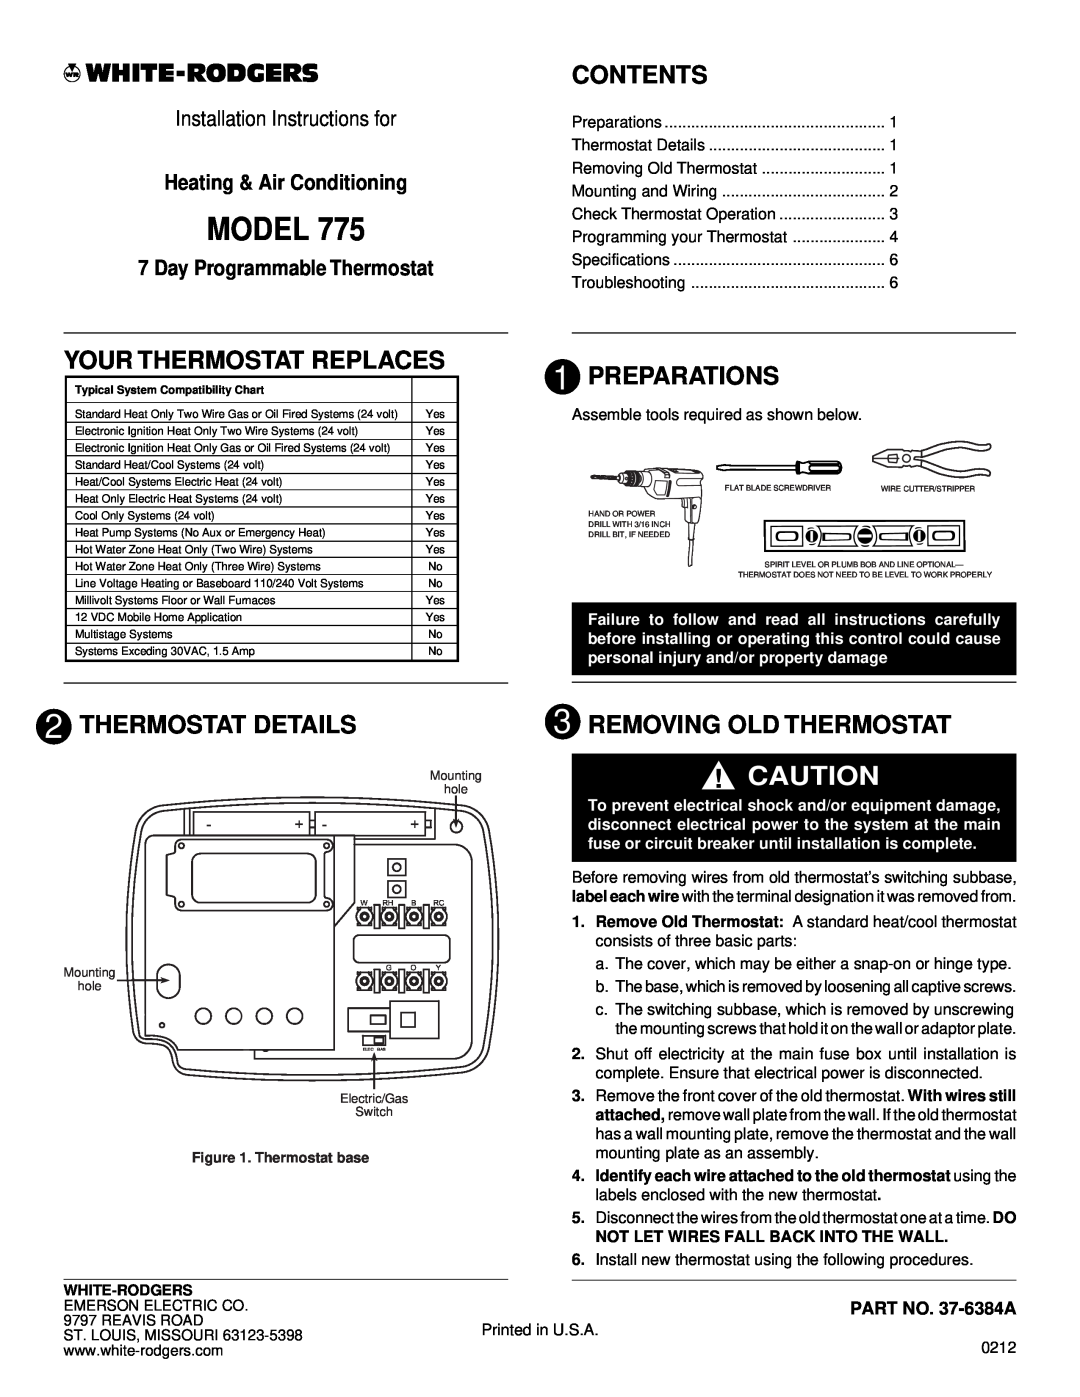 White Rodgers 775 installation instructions Your Thermostat Replaces, Contents, Preparations, Thermostat Details, Model 